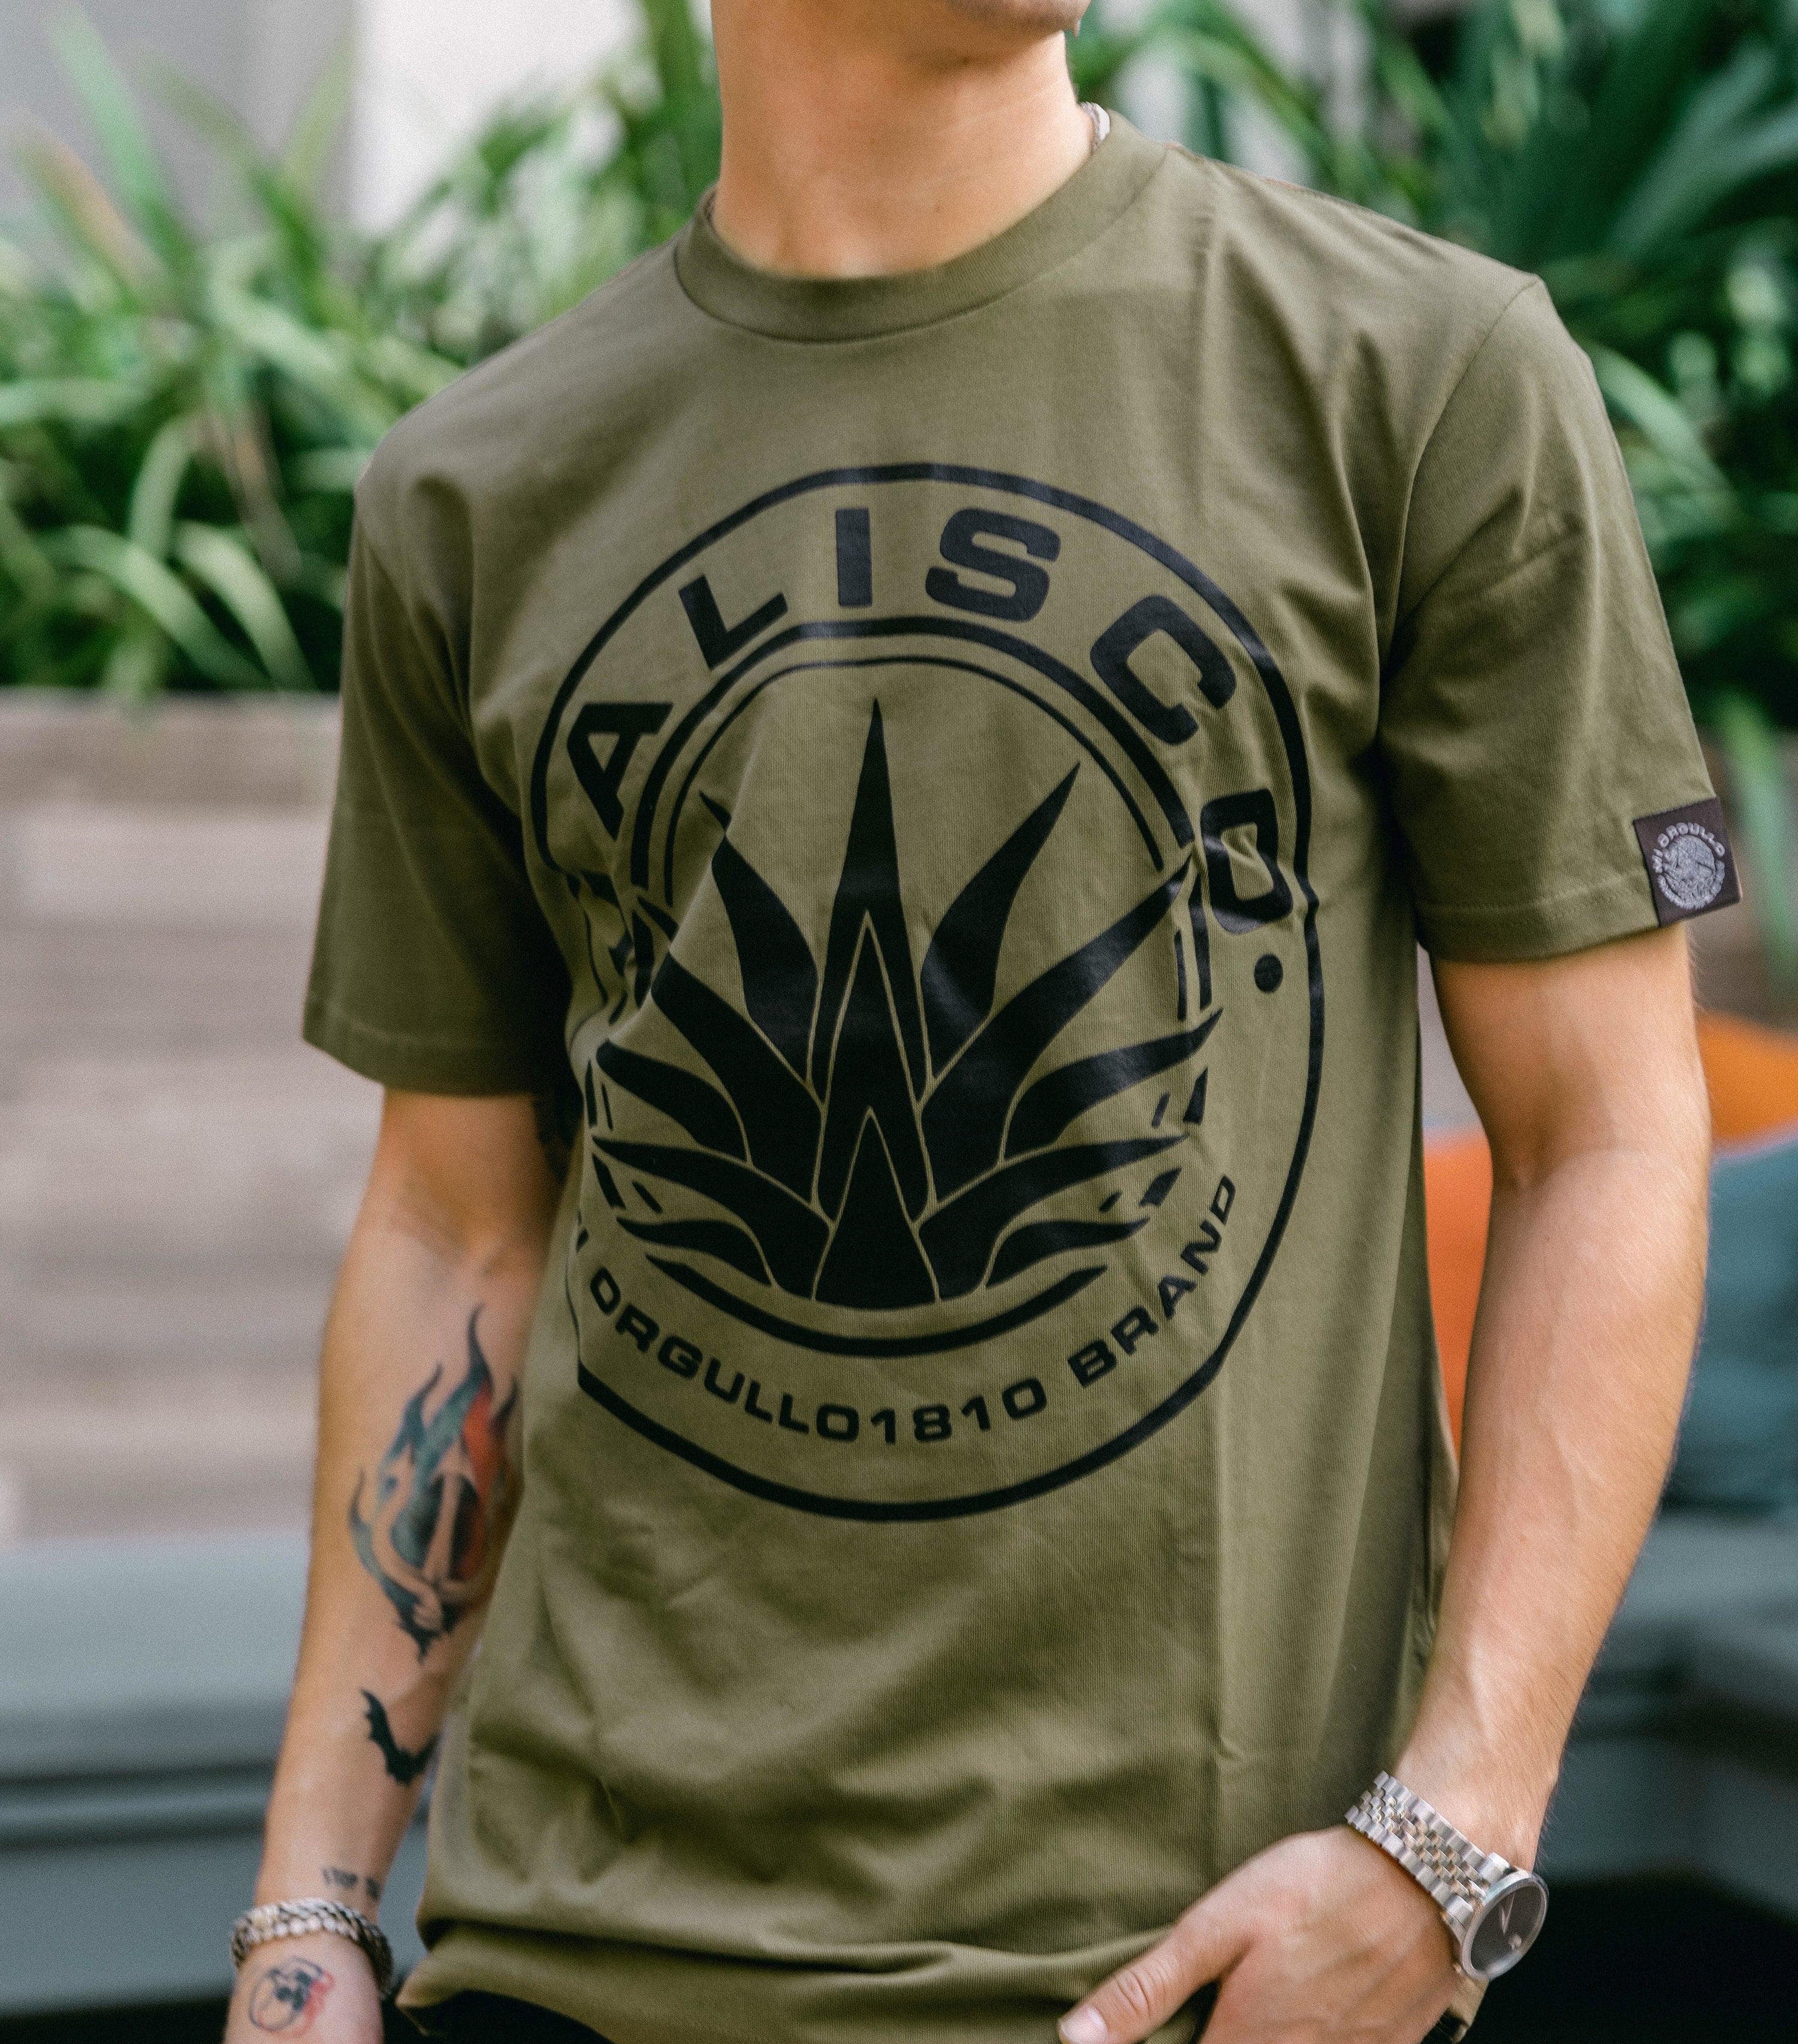 JALISCO AGAVE ARMY T-SHIRT